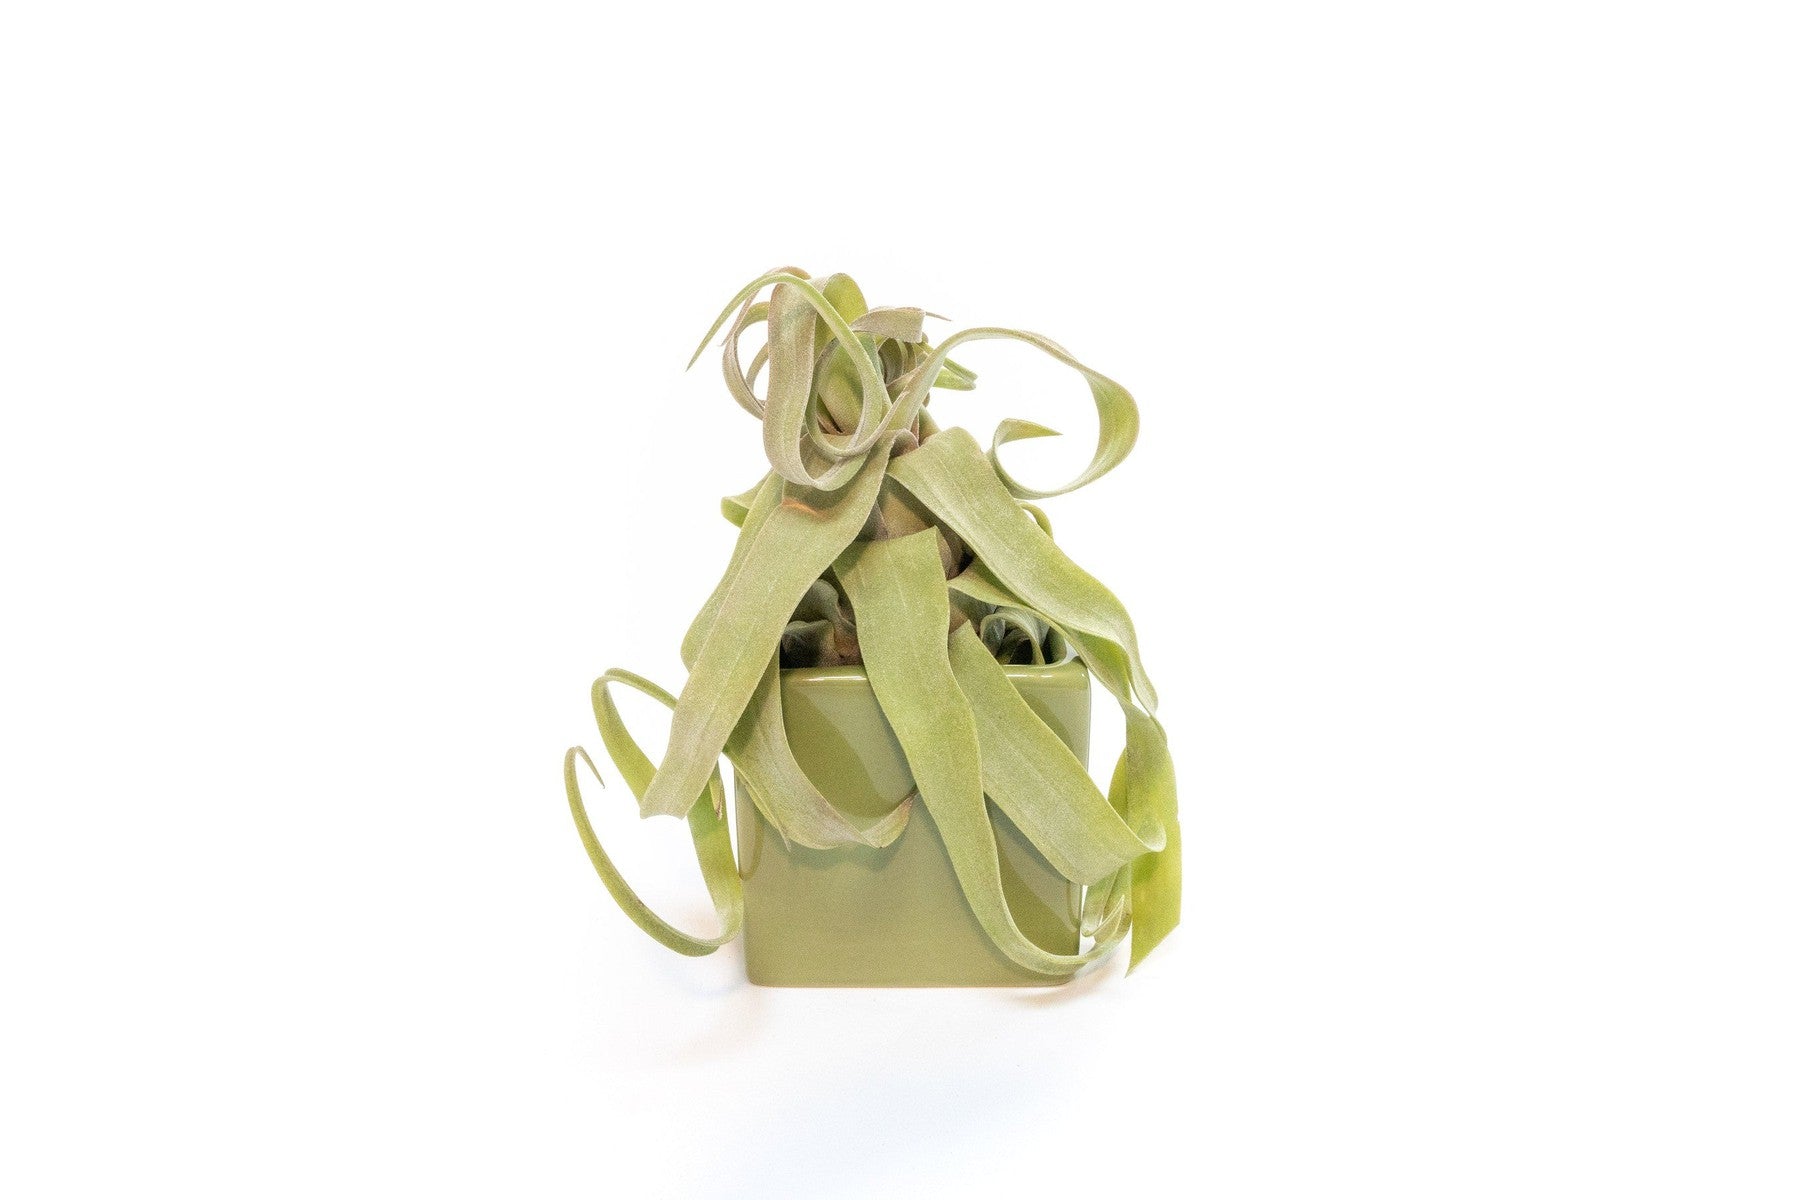 Avocado Green Ceramic Cube Container with Assorted Large Tillandsia Air Plant-The Succulent Source